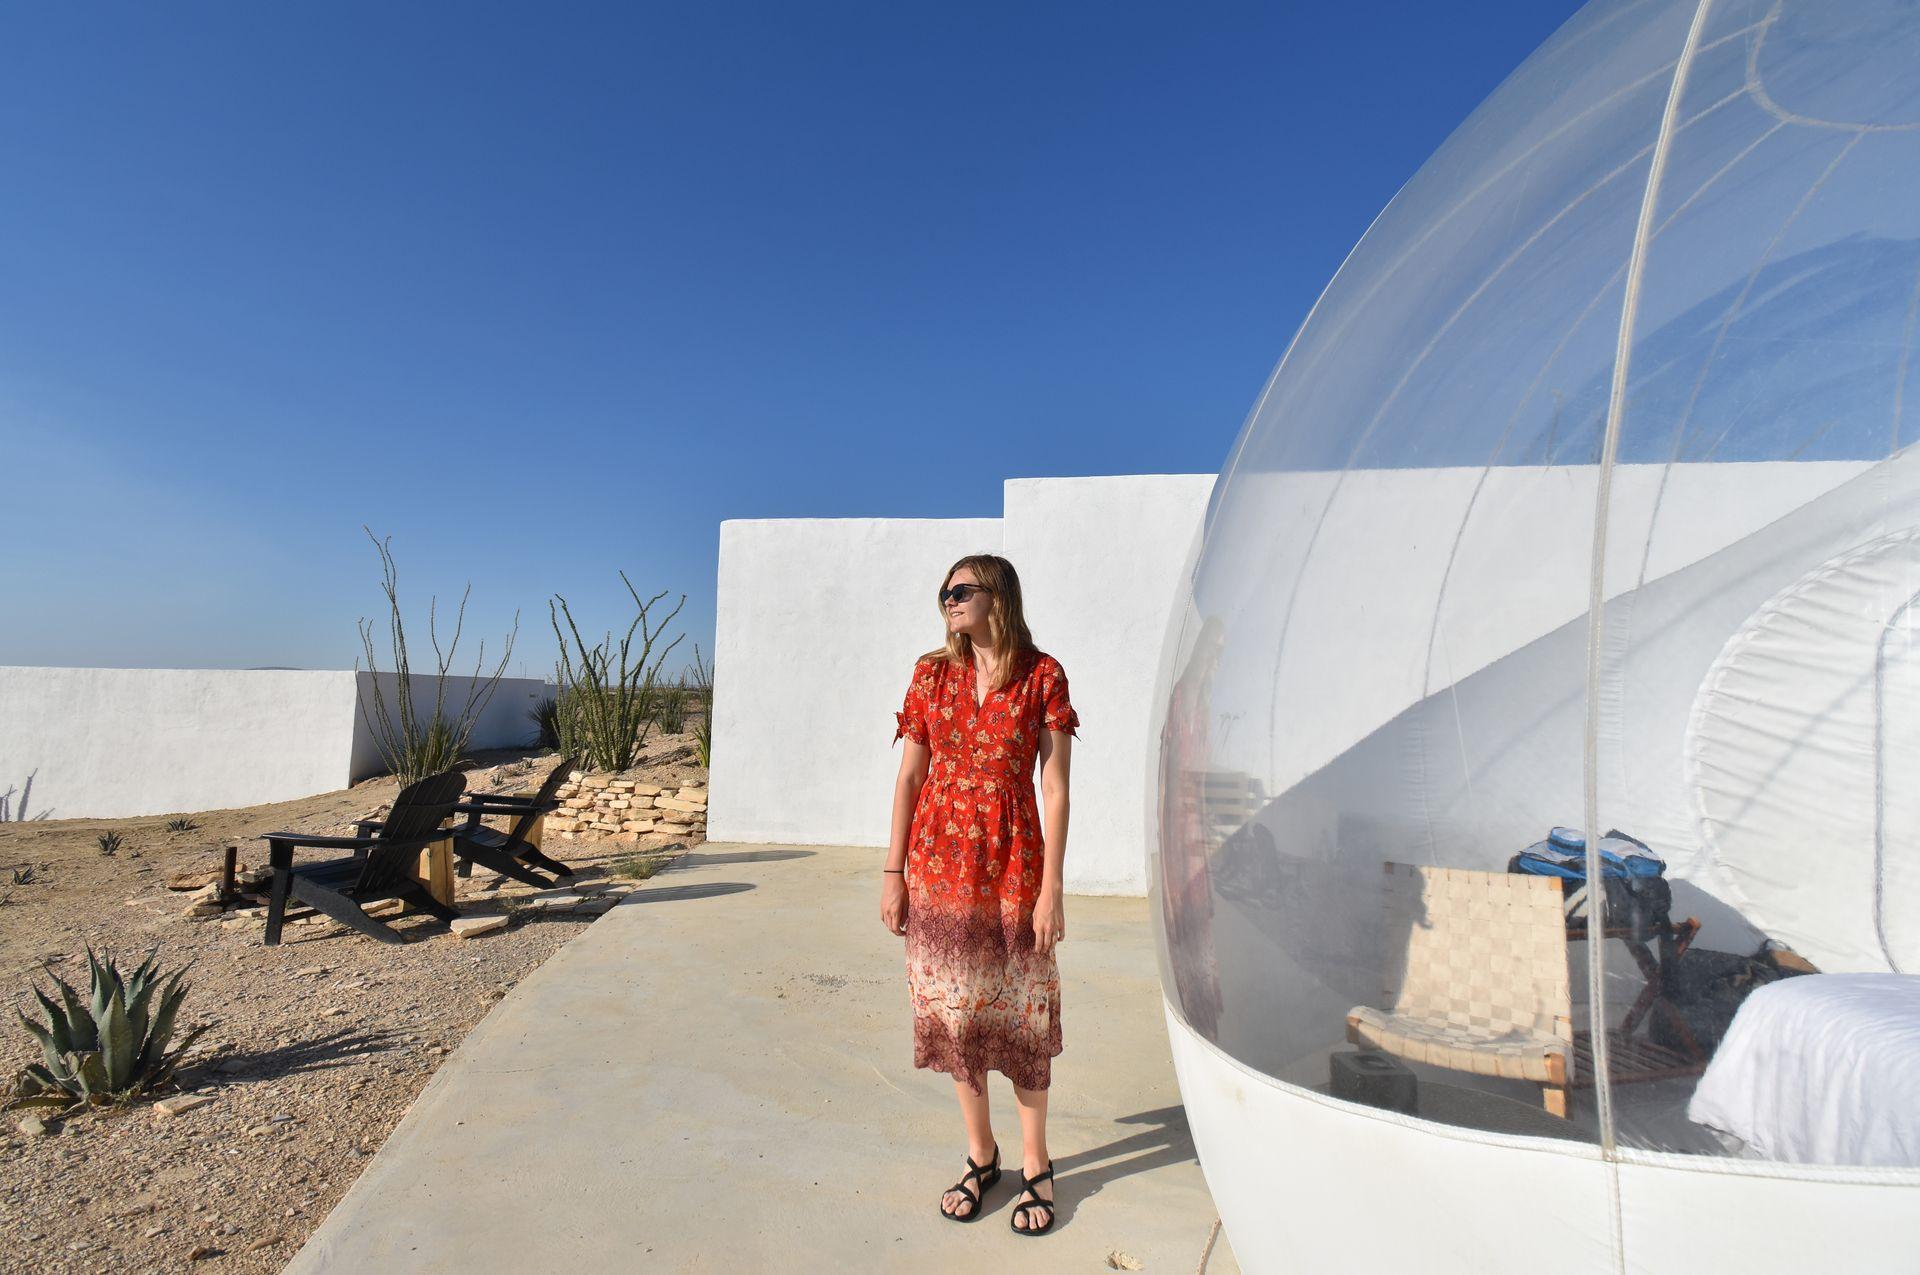 Lydia wearing a red dress standing next to a clear bubble. There are white walls and some outdoor chairs in the background.